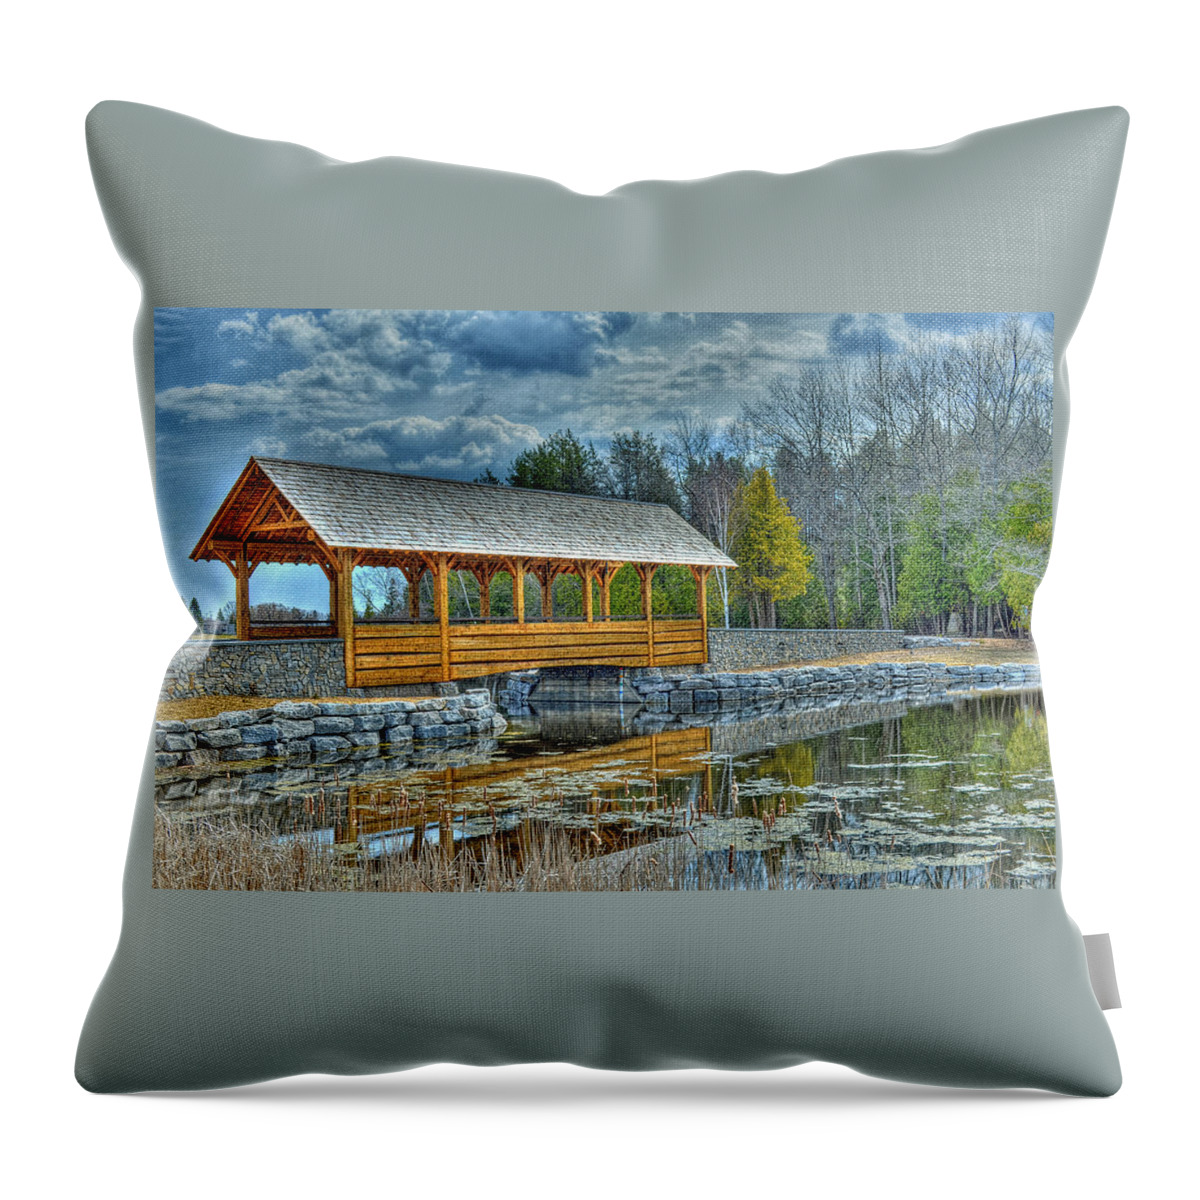 Bridge Throw Pillow featuring the photograph Bridge Over The Thunder Bay River by Rodney Campbell